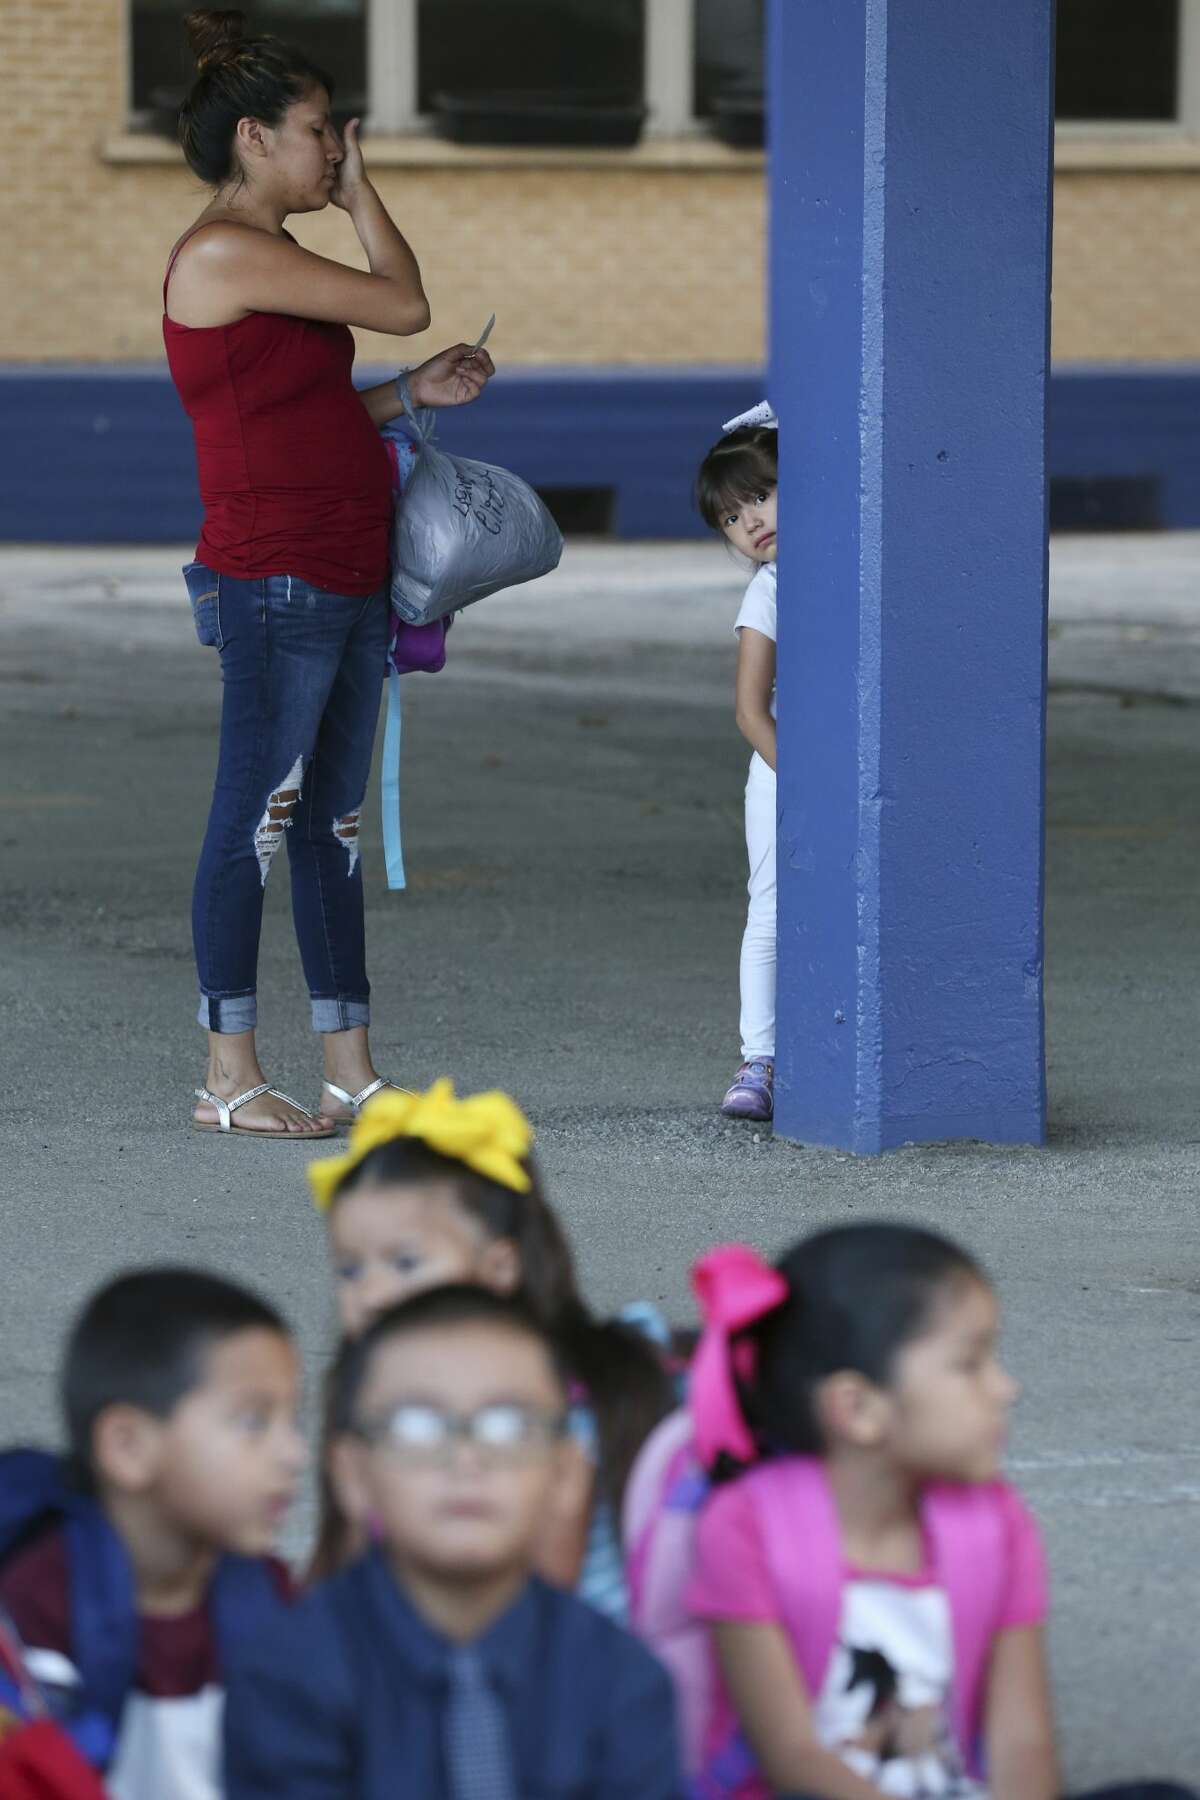 Lexie Elizondo, 4, refuses to join the rest of the pre-kinder students as her mother, Claudia Chavarria tries to coax her on the first day of classes at the newly reopened Athens Elementary School in the South San Independent School District, Monday, Aug. 19, 2019. Athens in one of three schools that were reopened in the district that also includes Kazen Middle School and West Campus. The district spent nearly $3 million in improvements at the schoolsl.